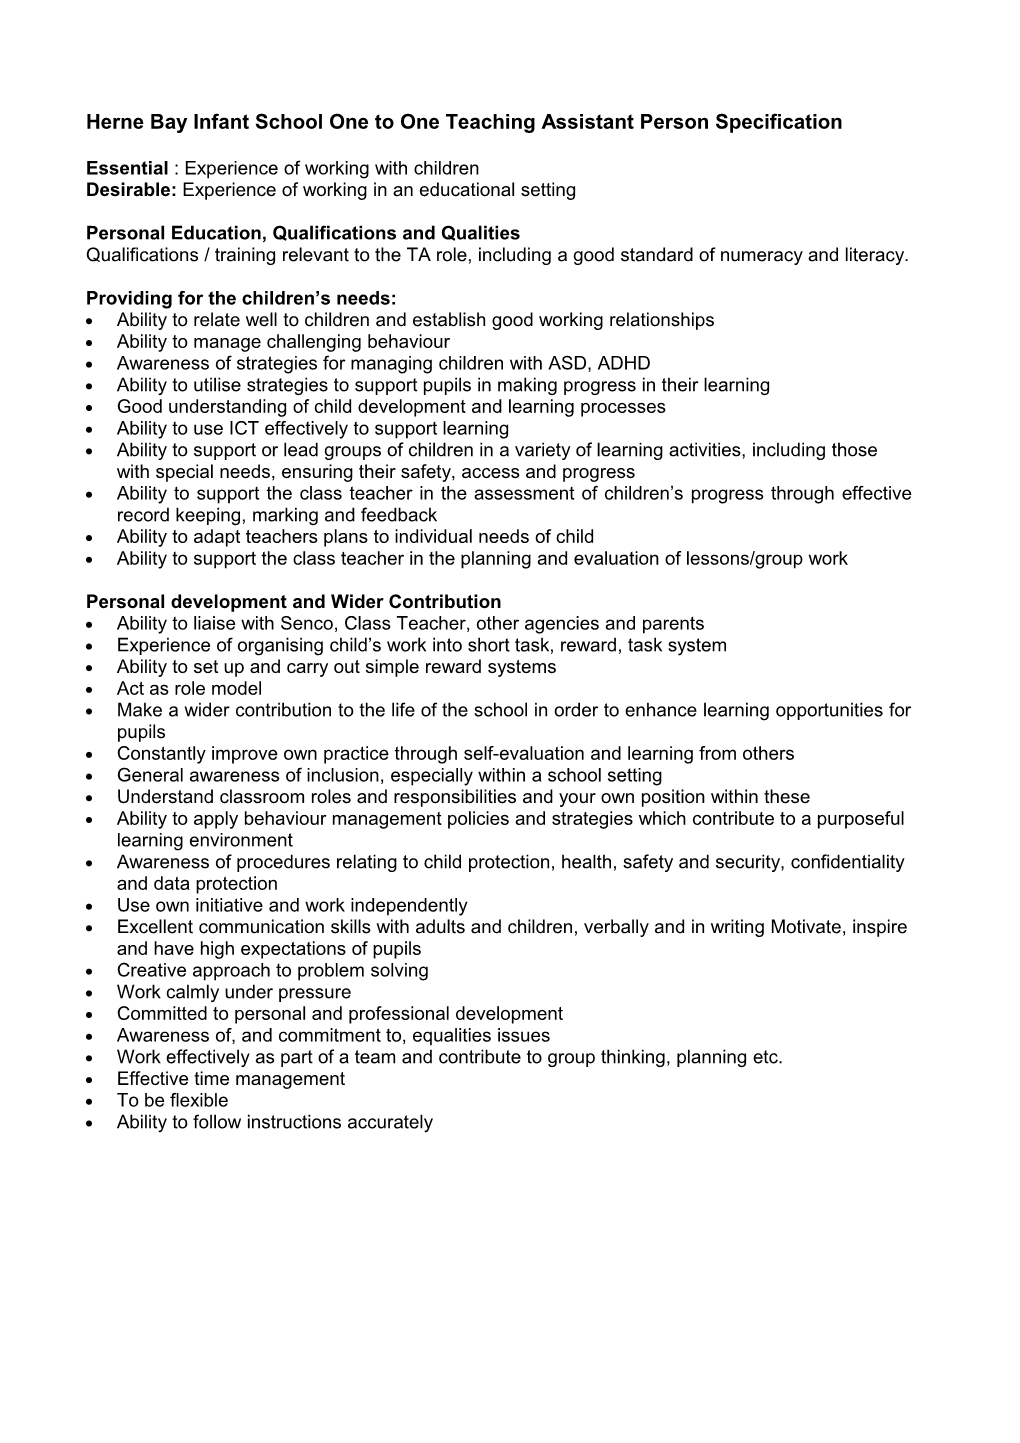 Herne Bay Infant School One to One Teaching Assistant Person Specification